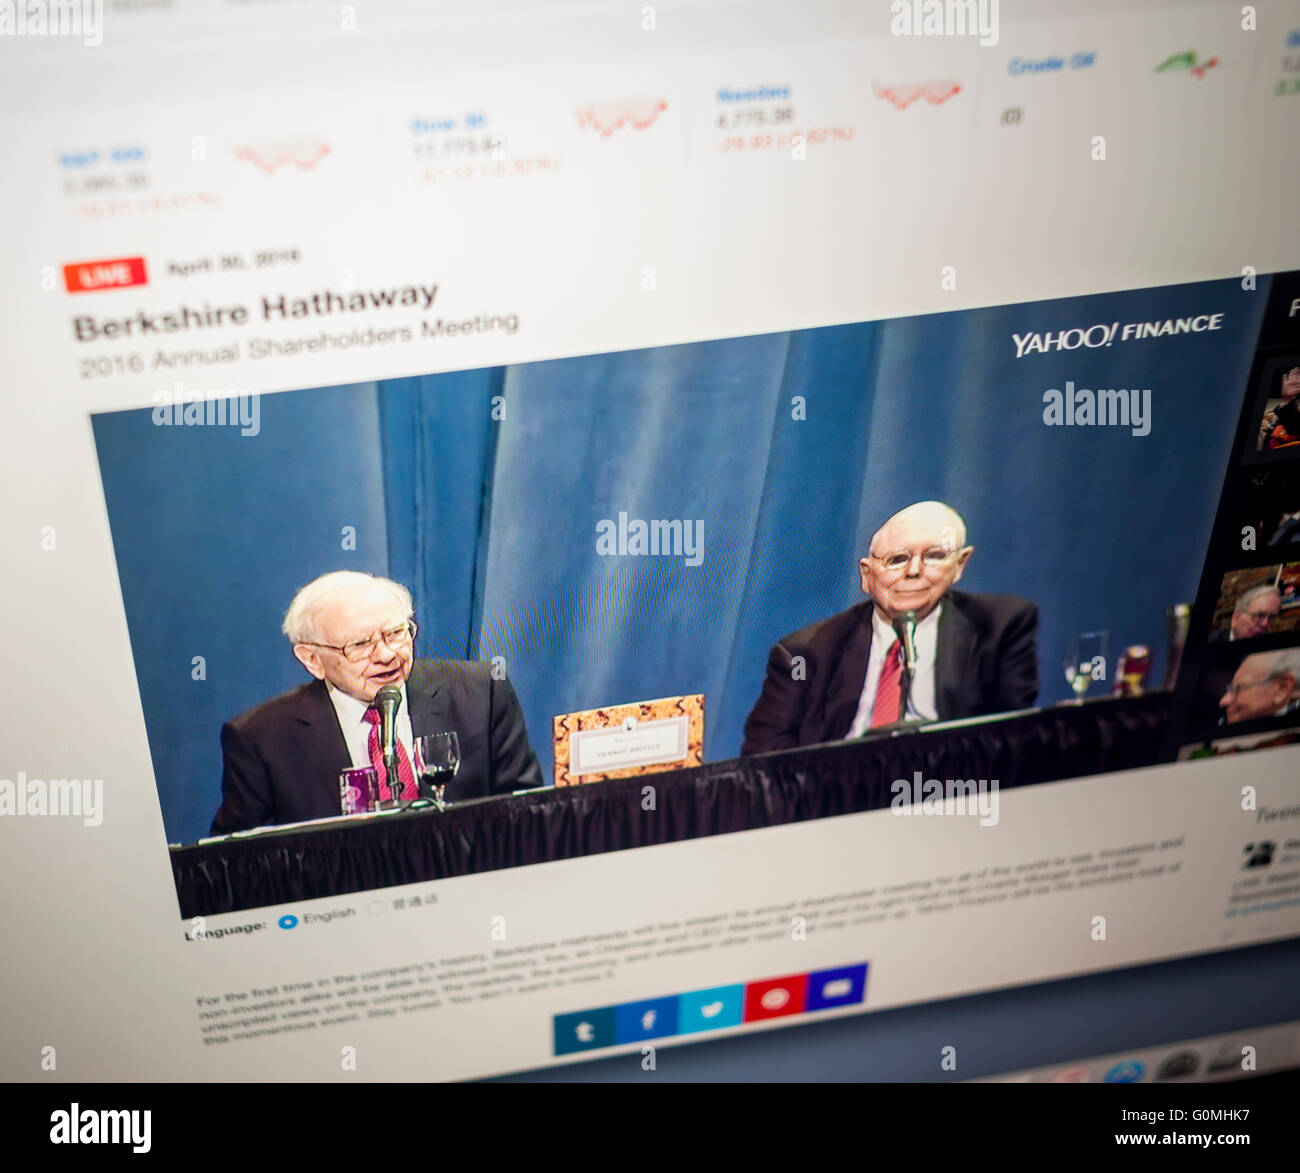 For the first time the annual shareholder meeting of Berkshire Hathaway, from Omaha, Nebraska, is being live streamed on Yahoo! Finance on Saturday, April 30, 2016. Warren Buffett, left, the Oracle of Omaha,  and his right-hand man Charlie Munger, right, answer questions at the meeting.  (© Richard B. Levine) Stock Photo